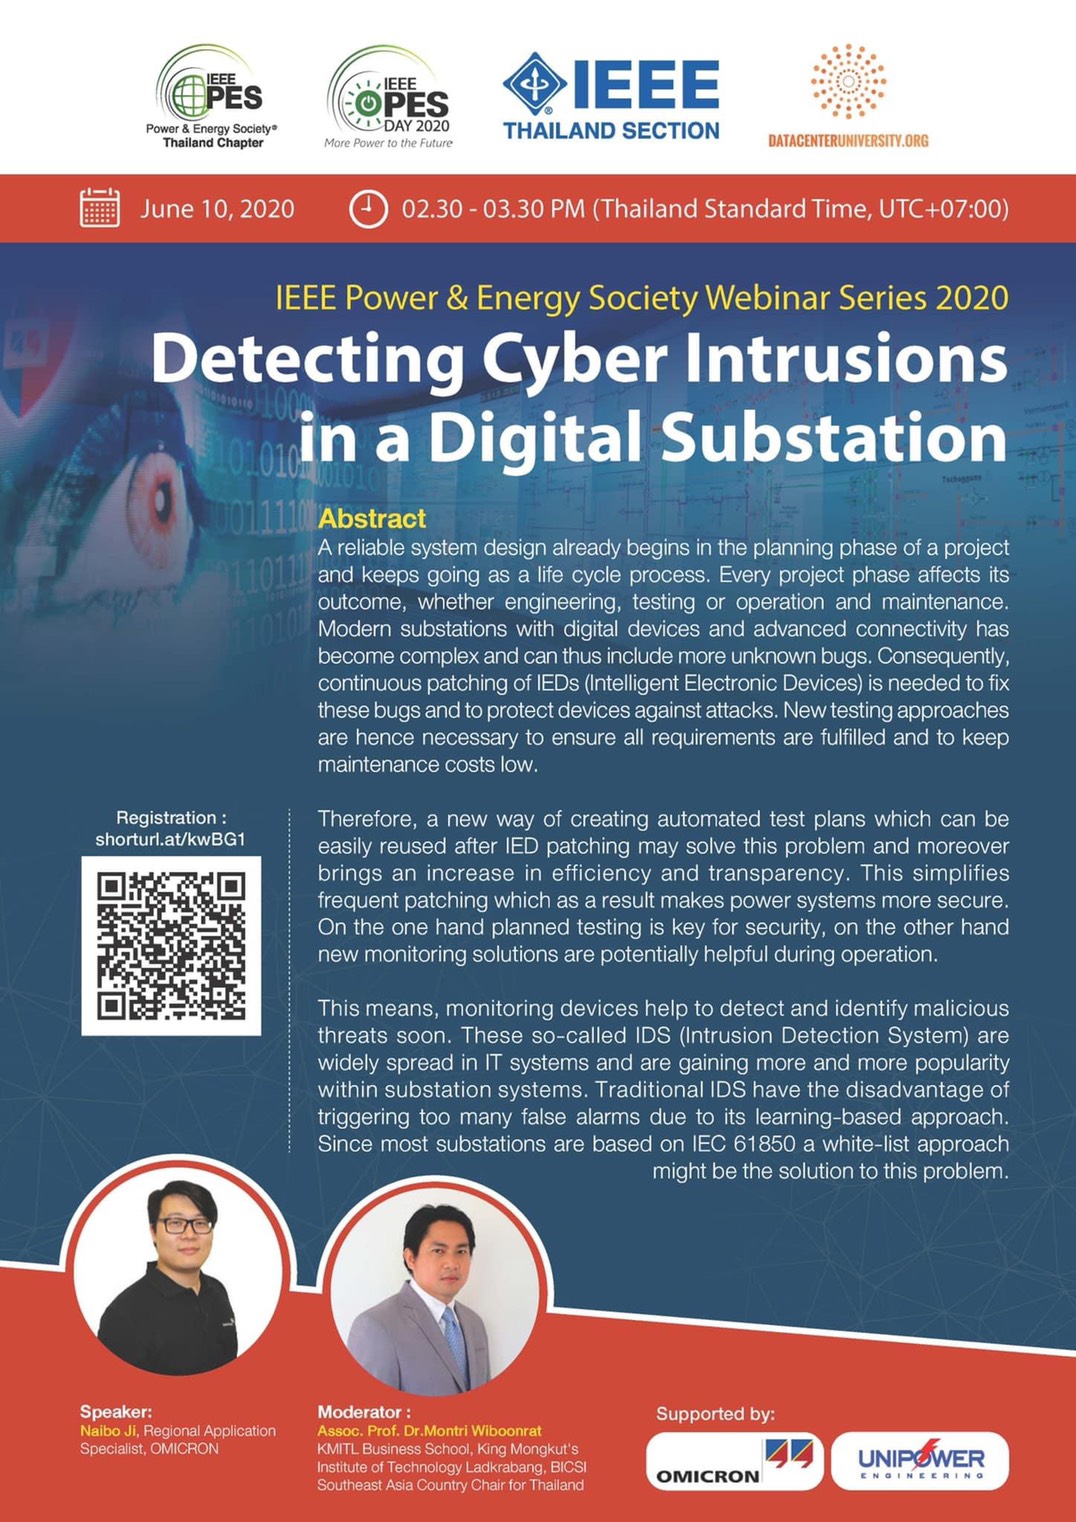 IEEE Thailand PES Chapter Webinar on Detecting Cyber Intrusions in a Digital Substation